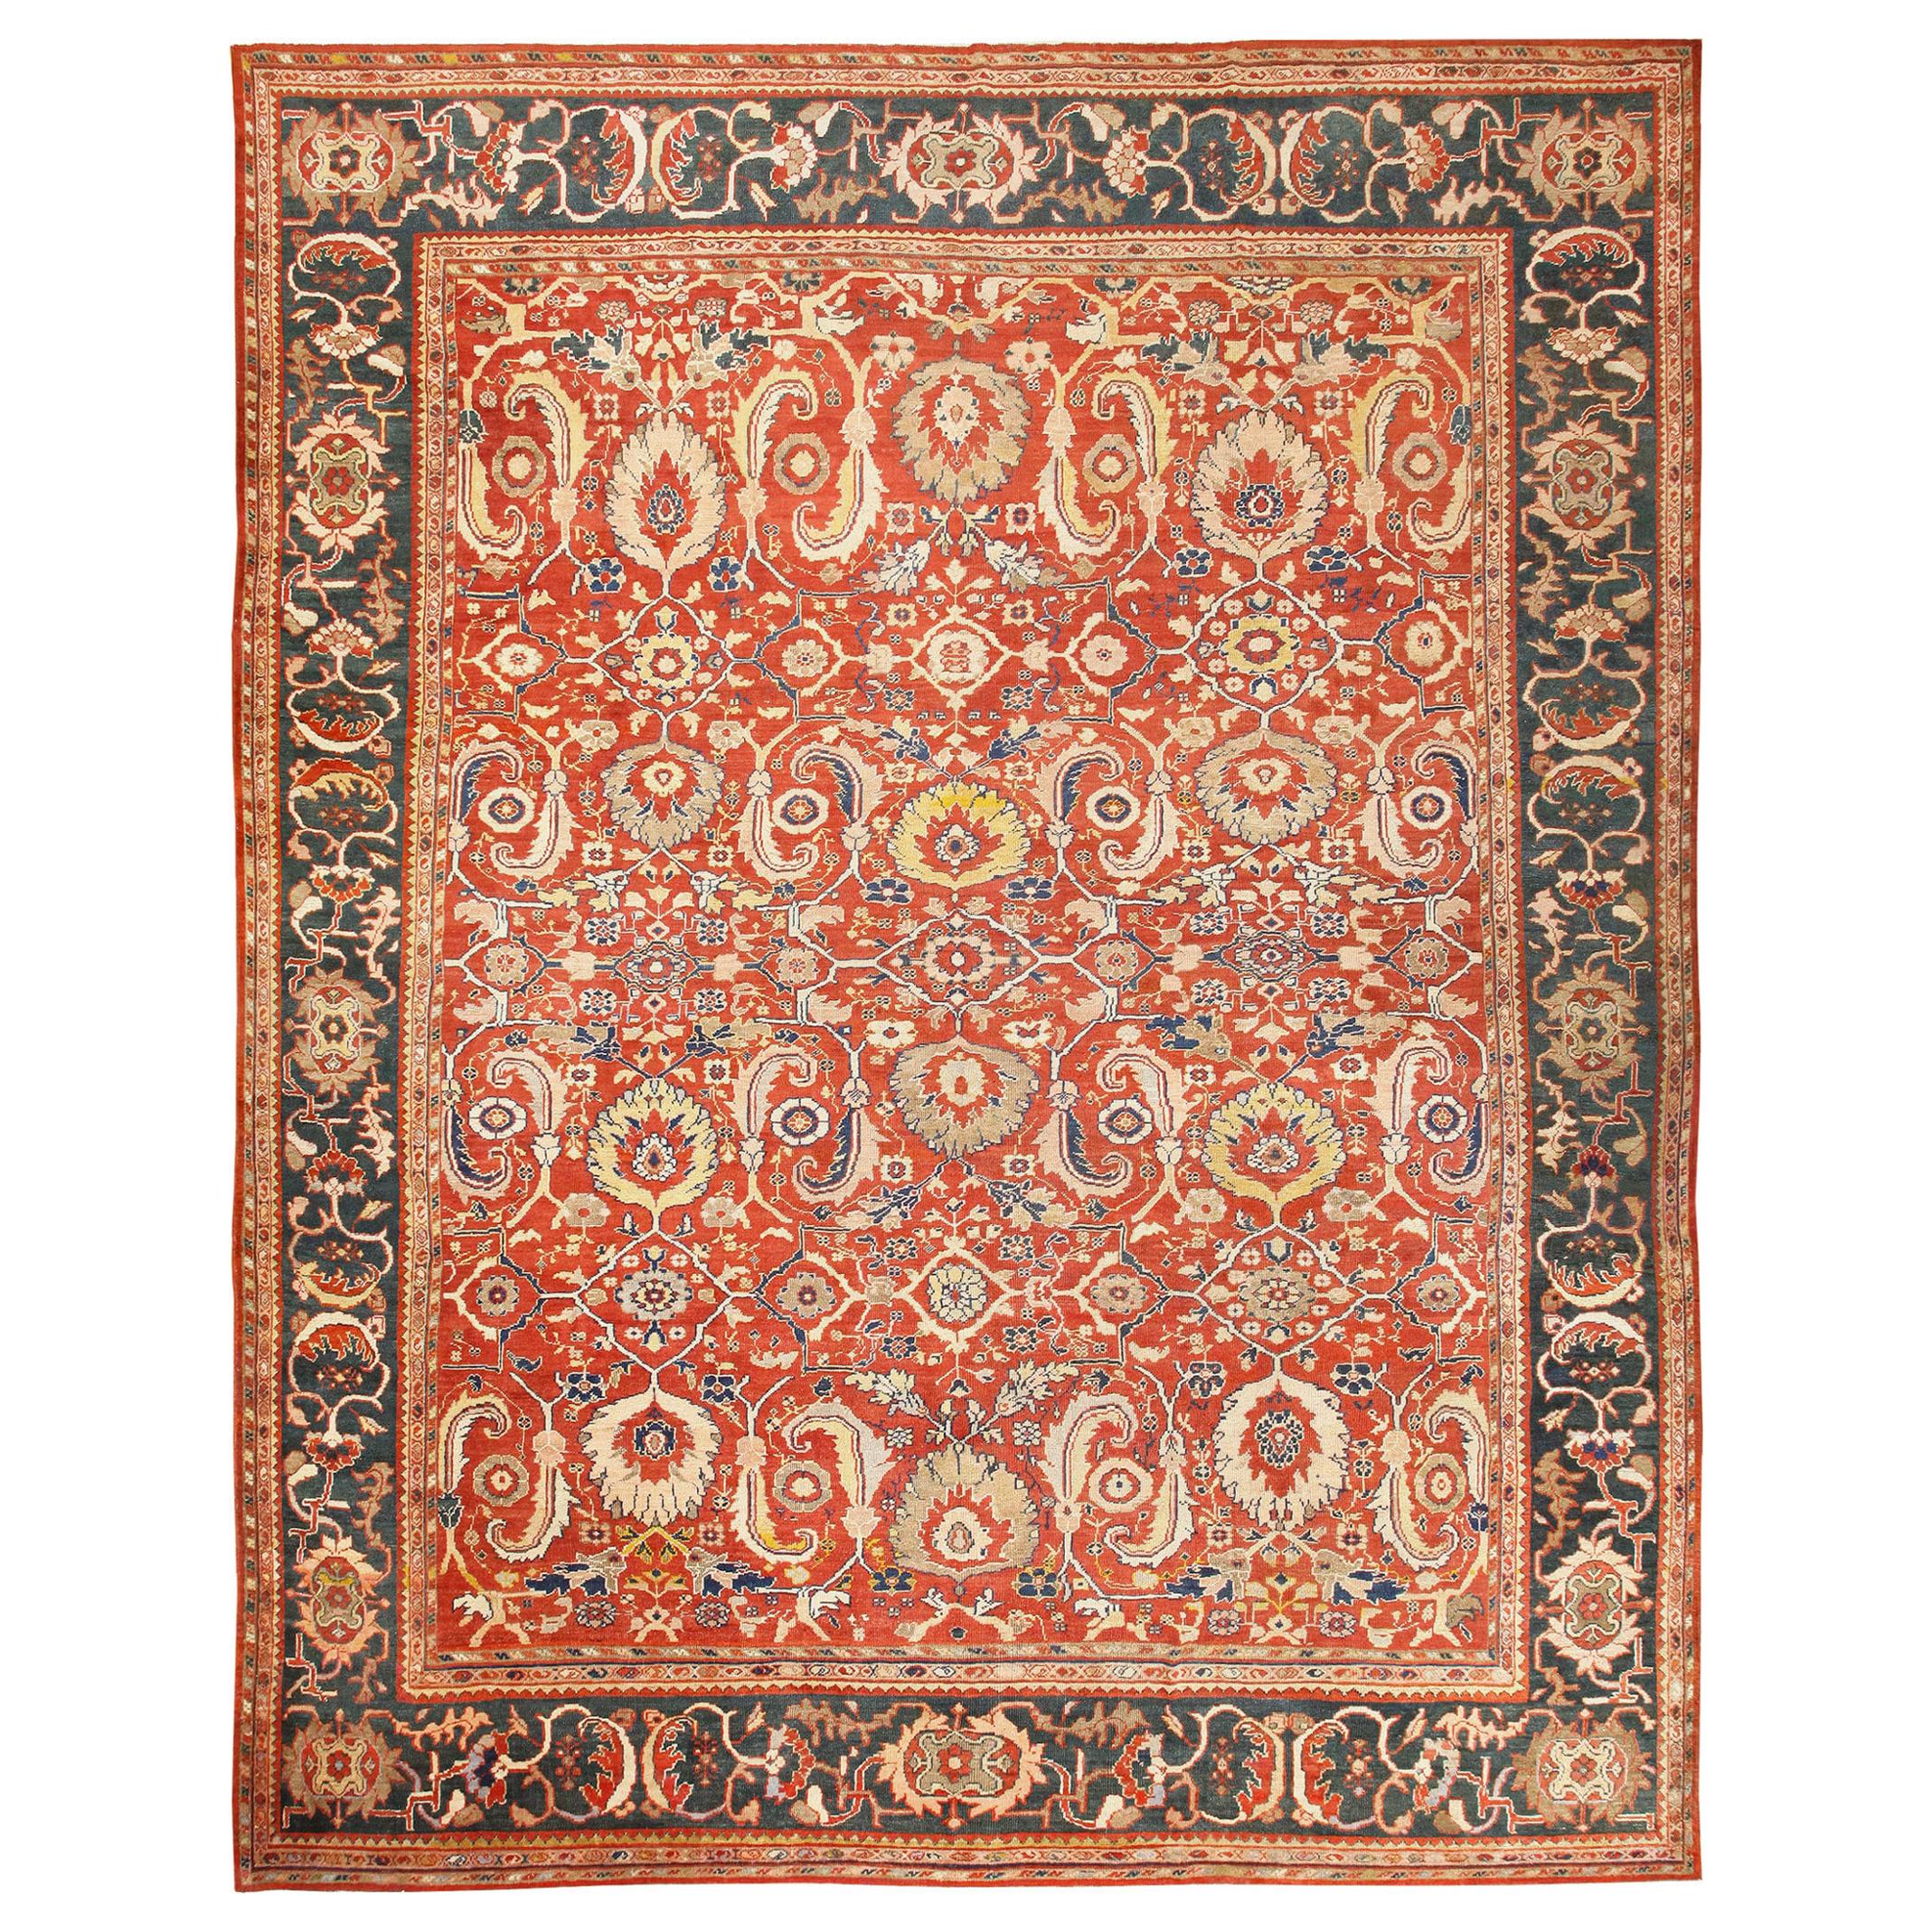 Antique Persian Sultanabad Rug. Size: 13' 7" x 17'